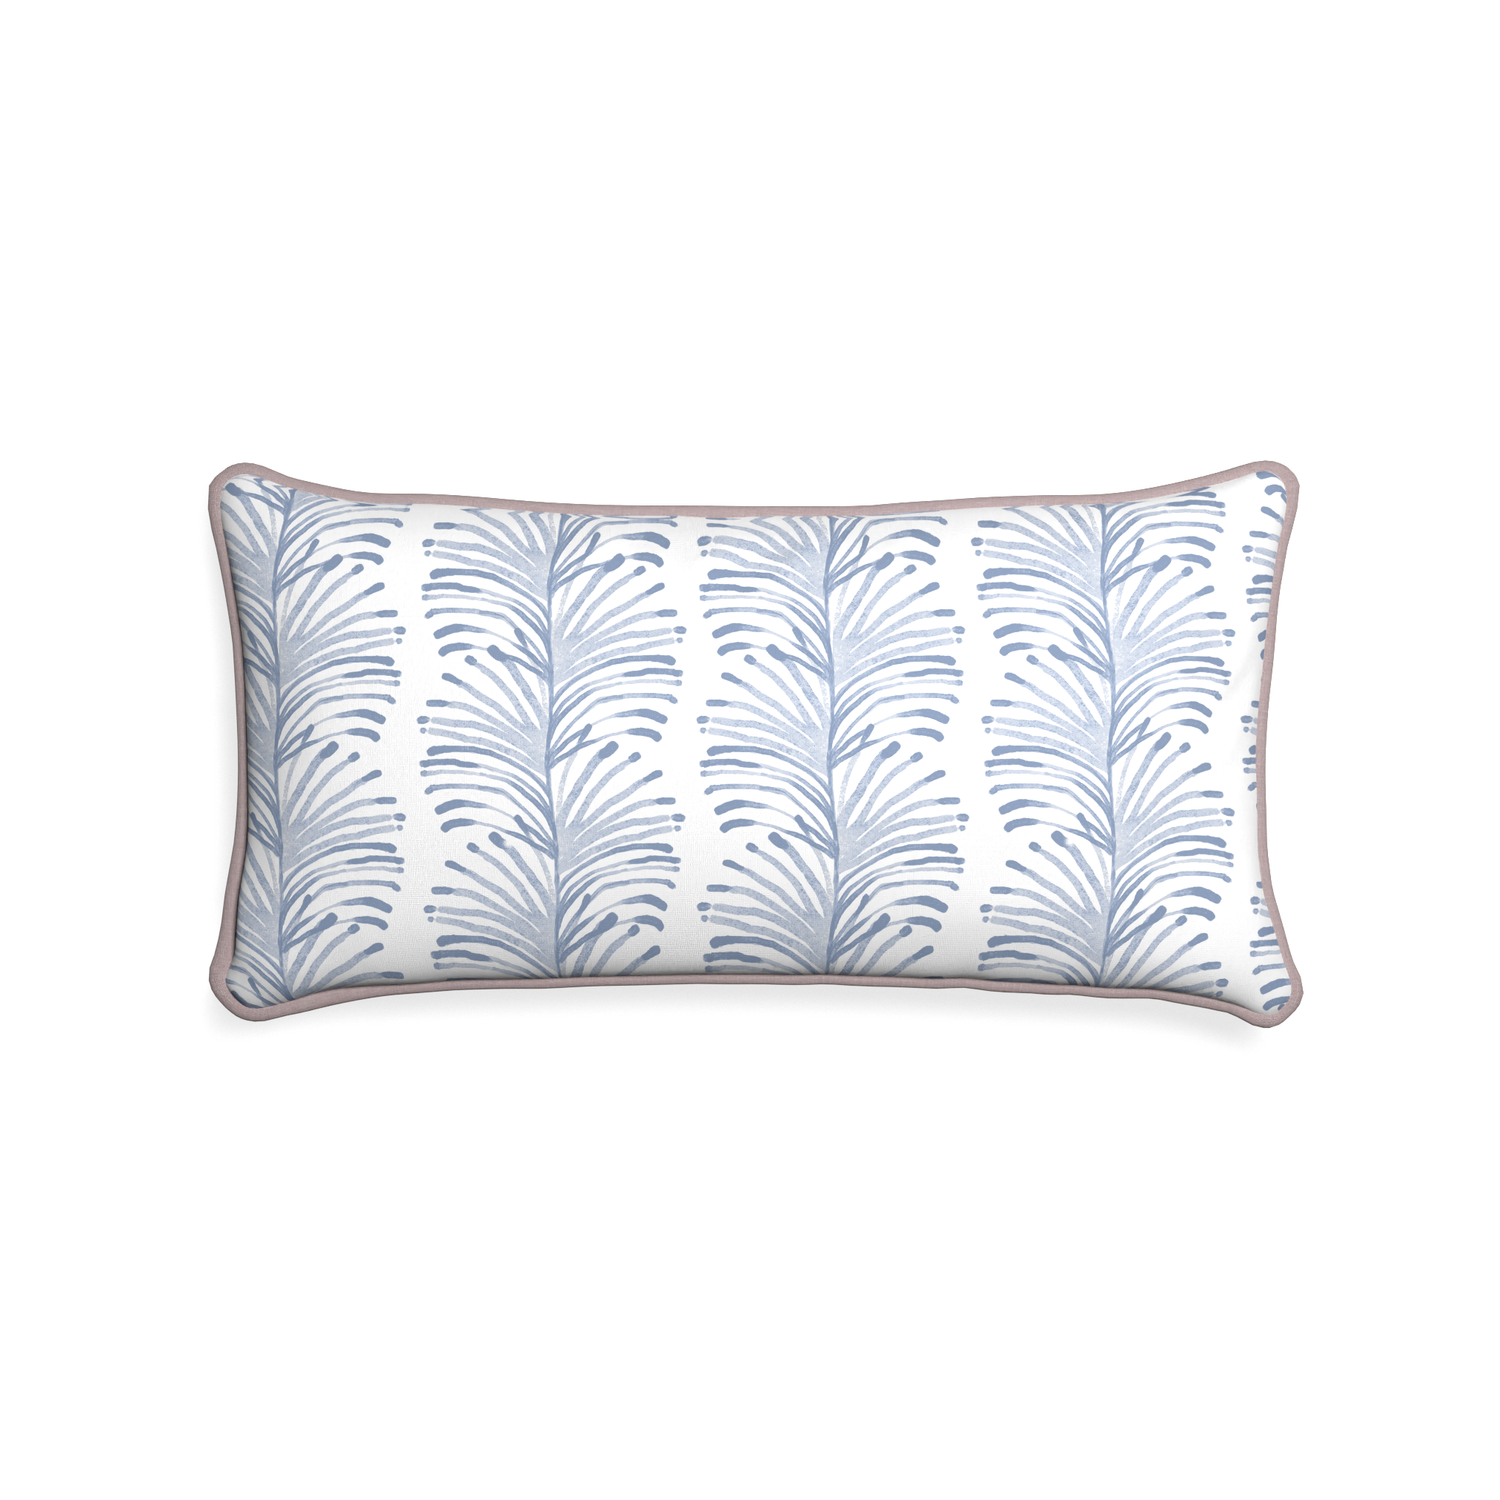 Midi-lumbar emma sky custom sky blue botanical stripepillow with orchid piping on white background